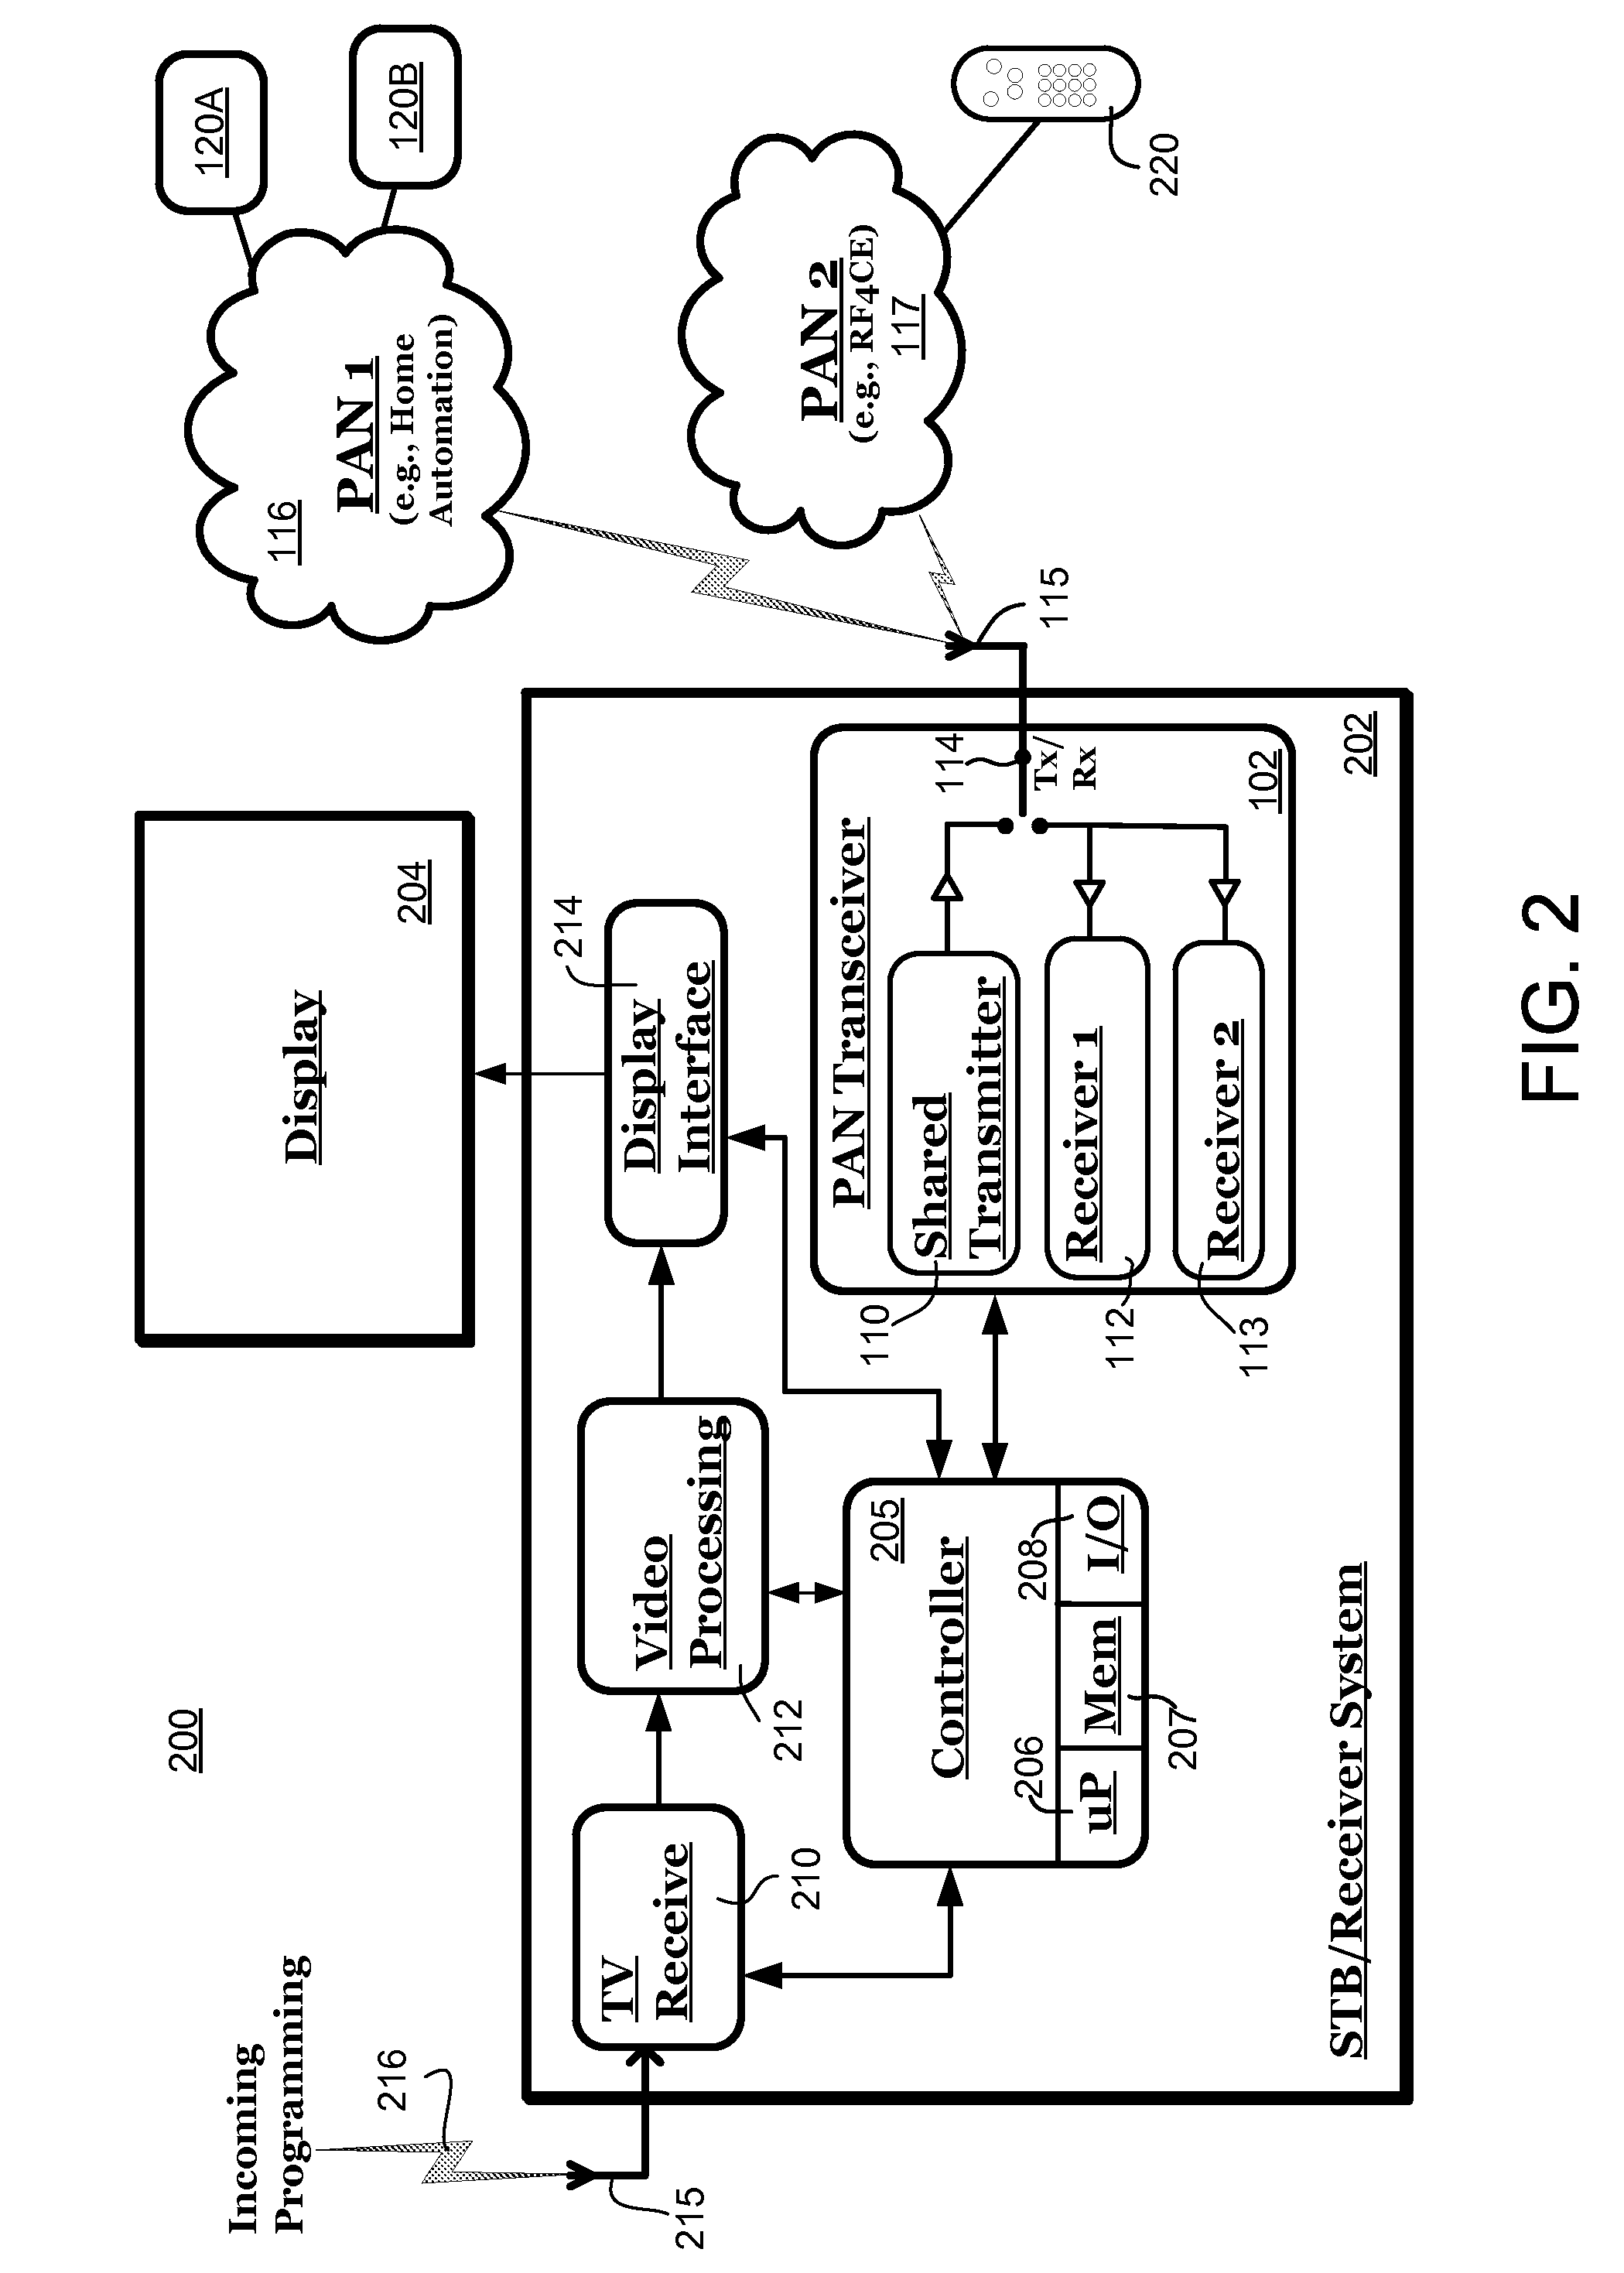 Multi personal area network (PAN) radio with shared transmitter